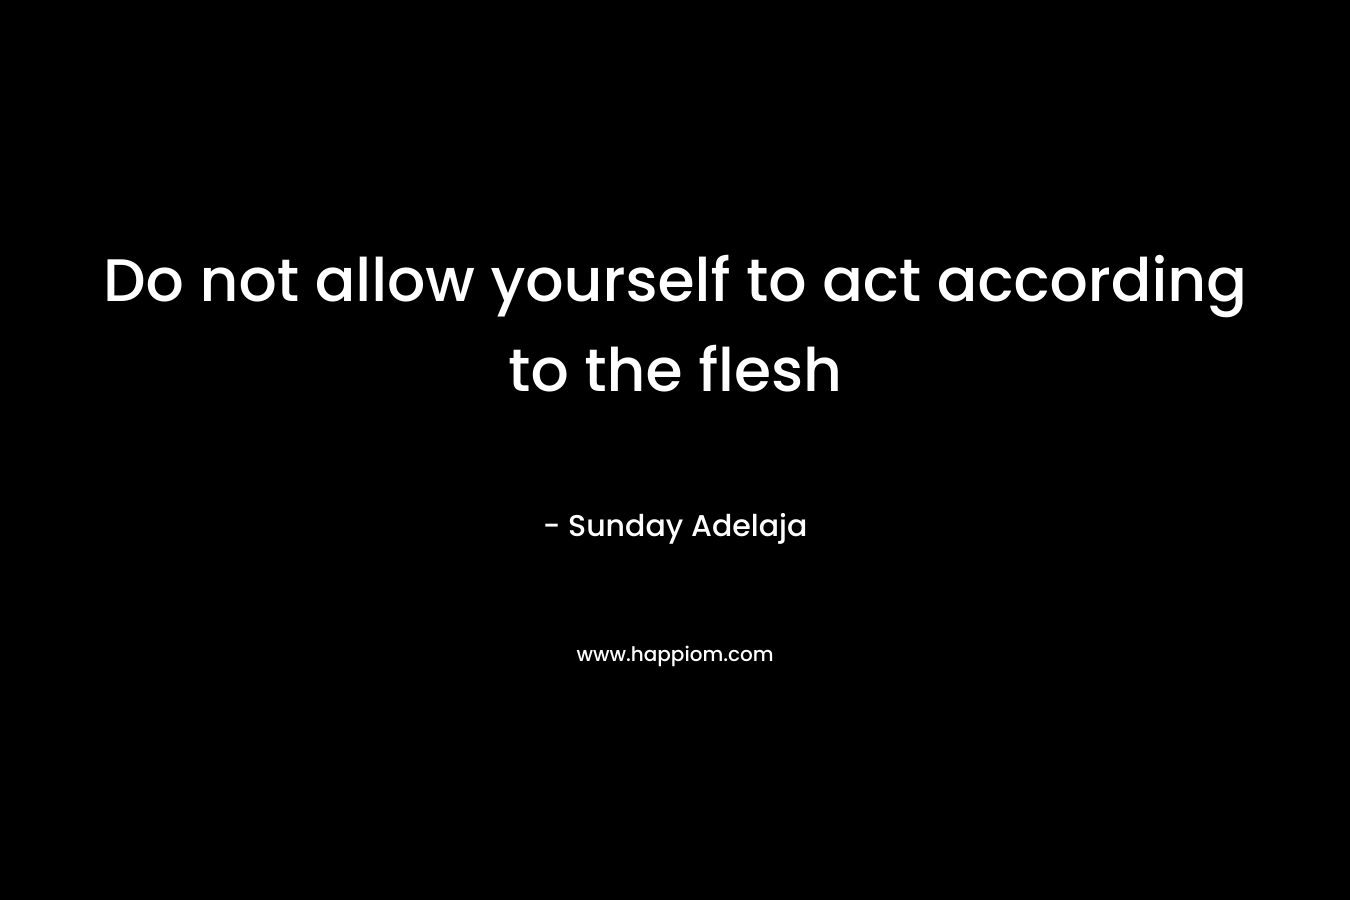 Do not allow yourself to act according to the flesh